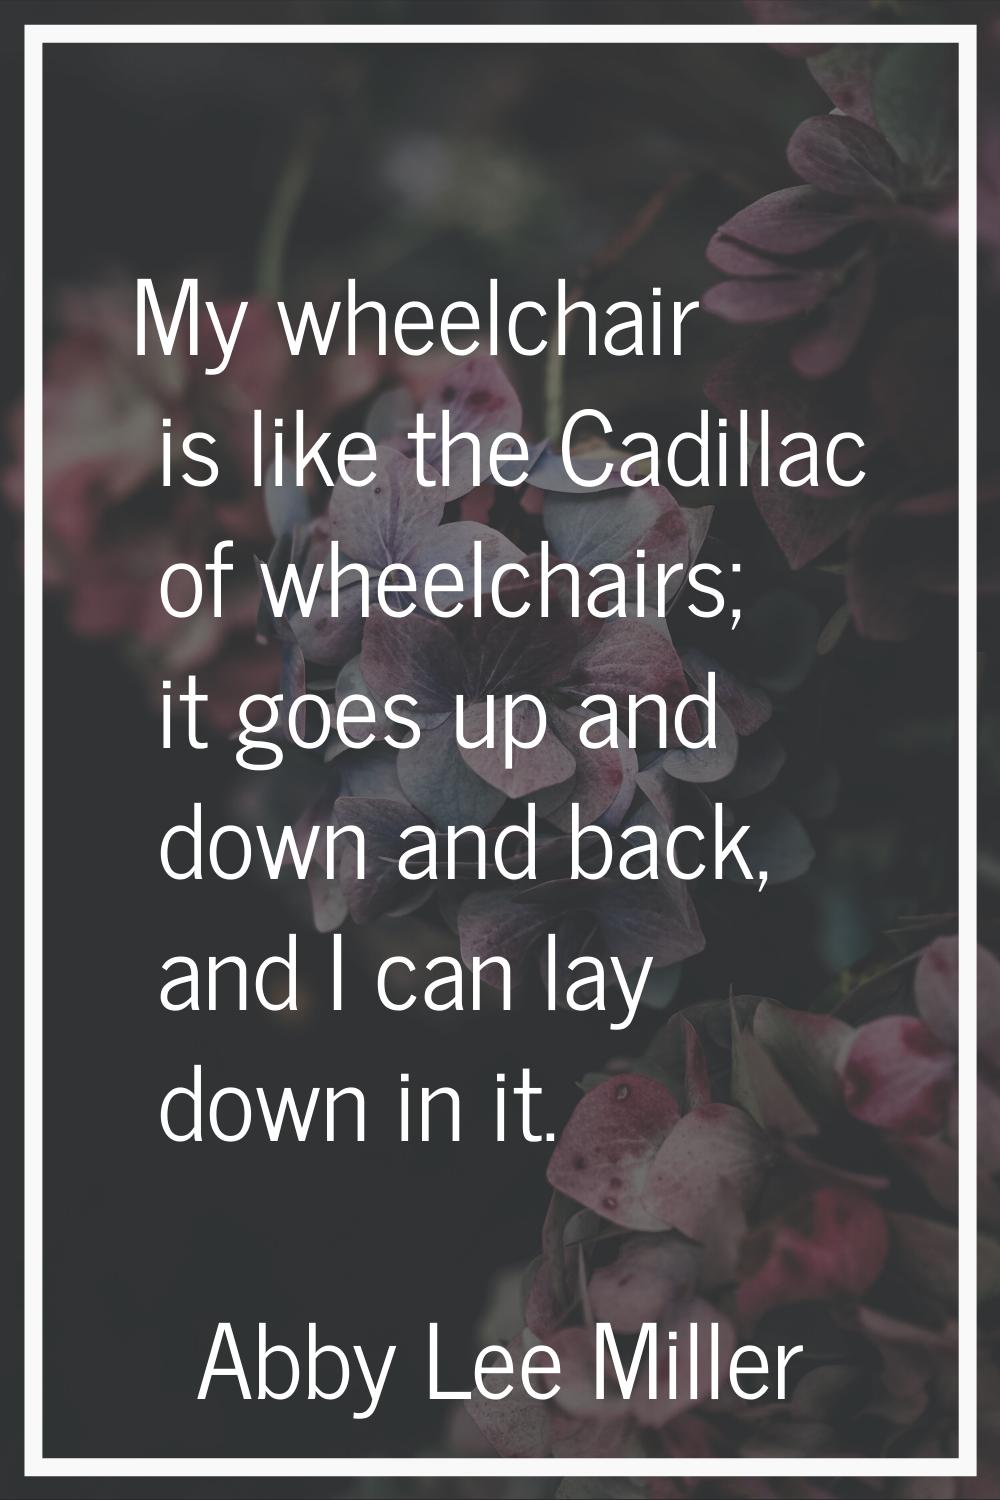 My wheelchair is like the Cadillac of wheelchairs; it goes up and down and back, and I can lay down